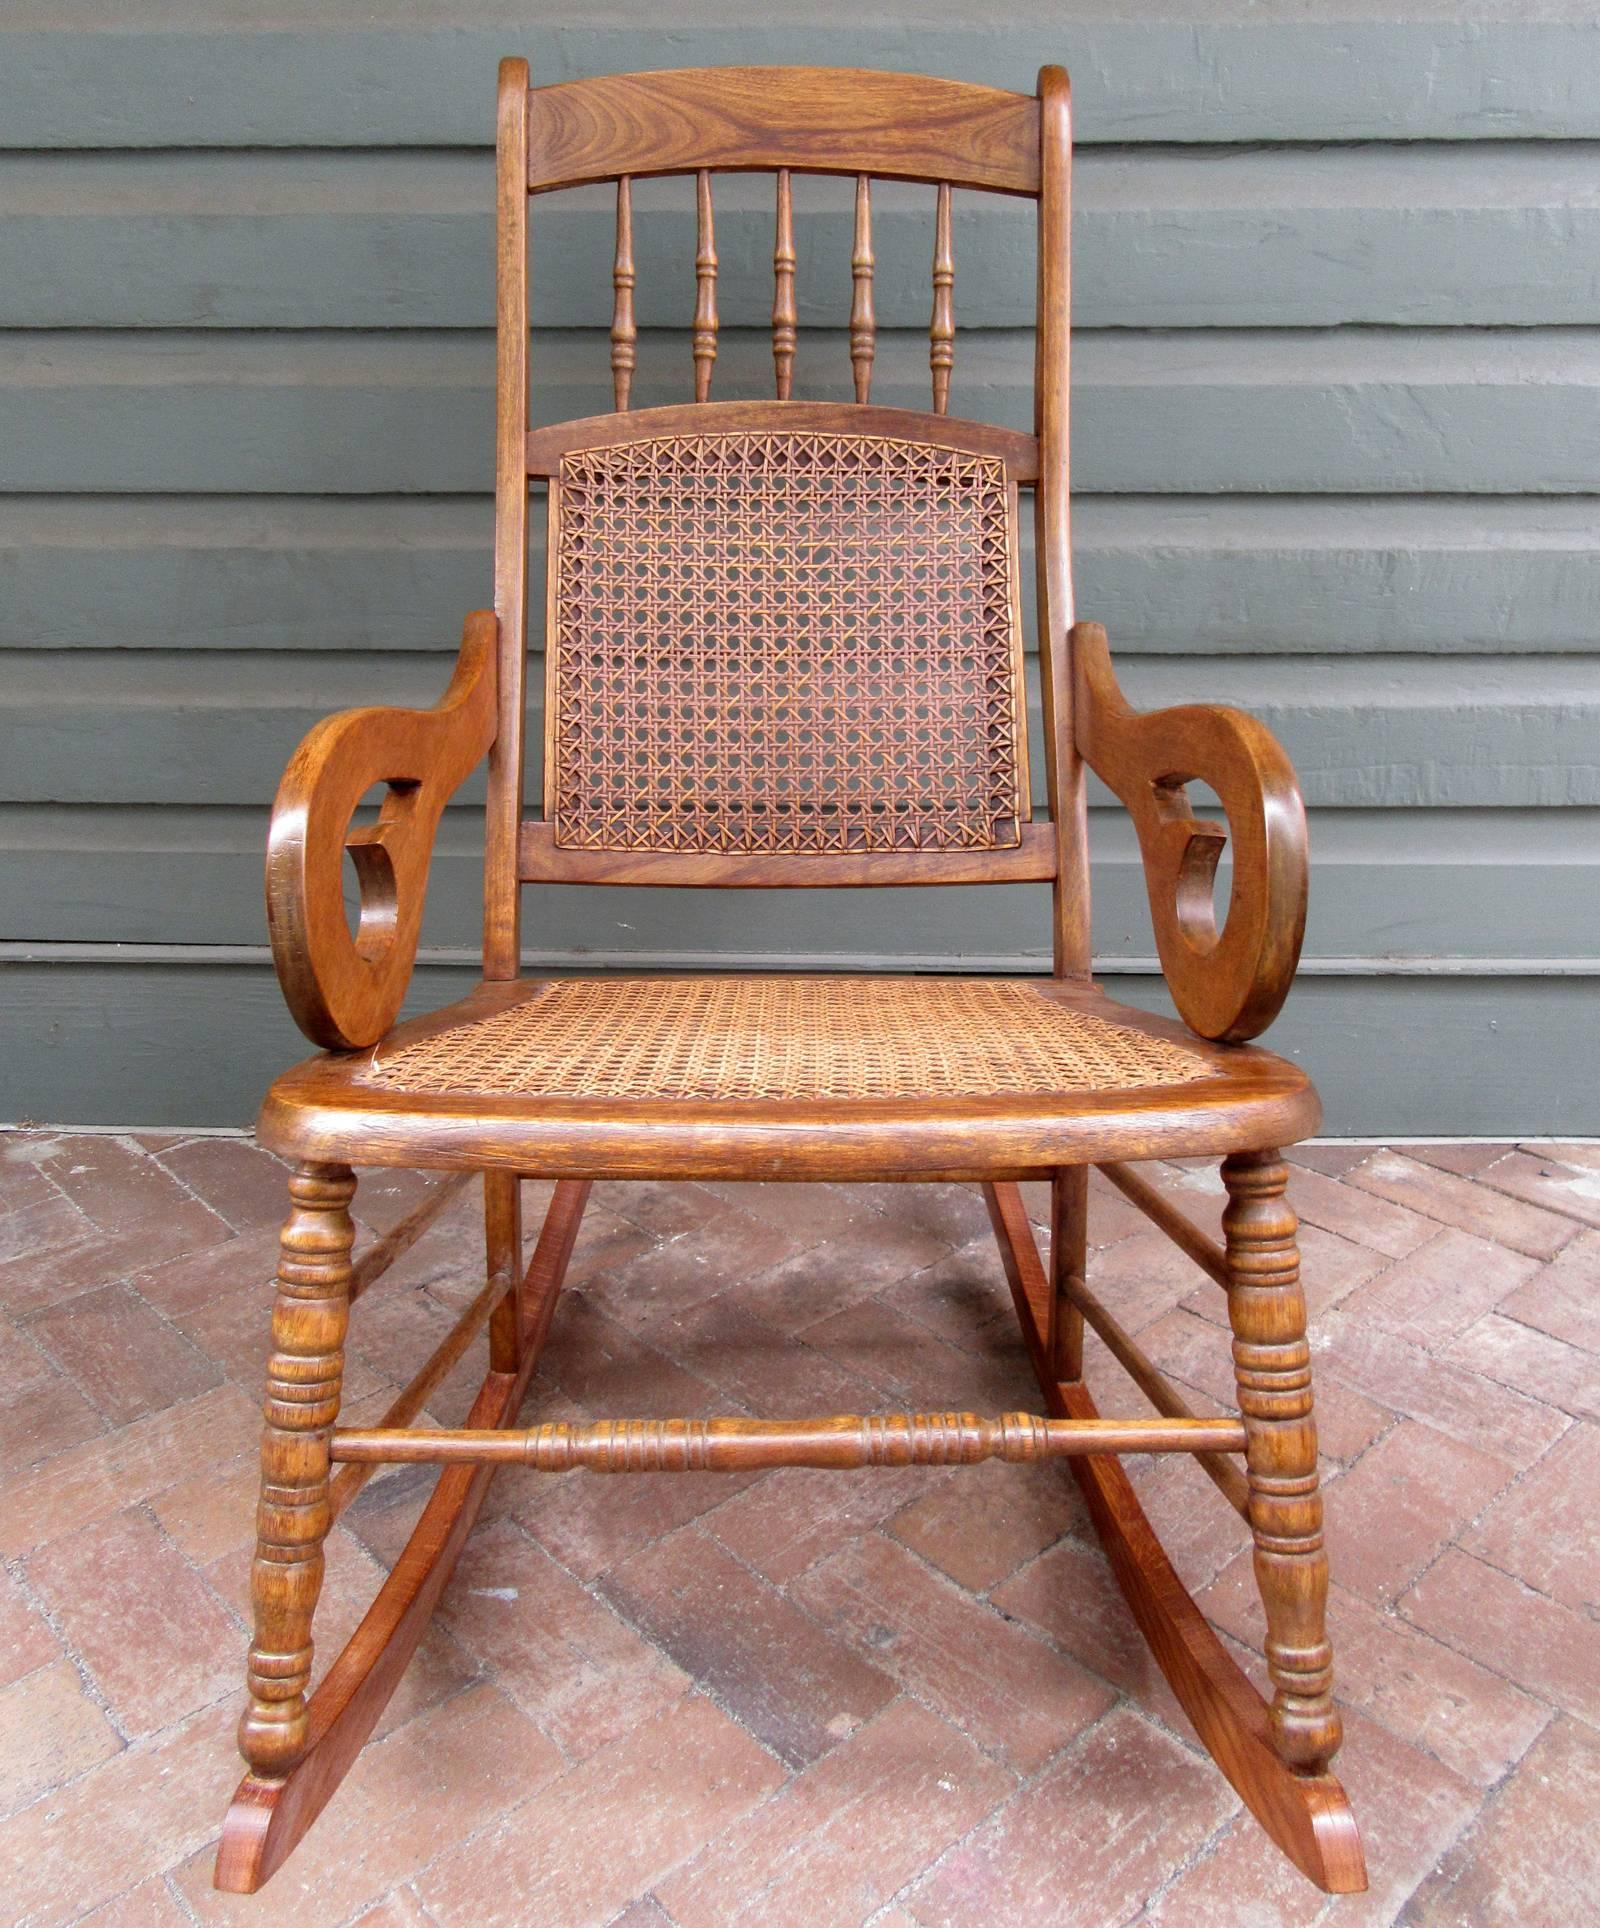 Hand-Carved Mid-19th Century St. Croix Regency Mahogany and Cane Rocking Chair